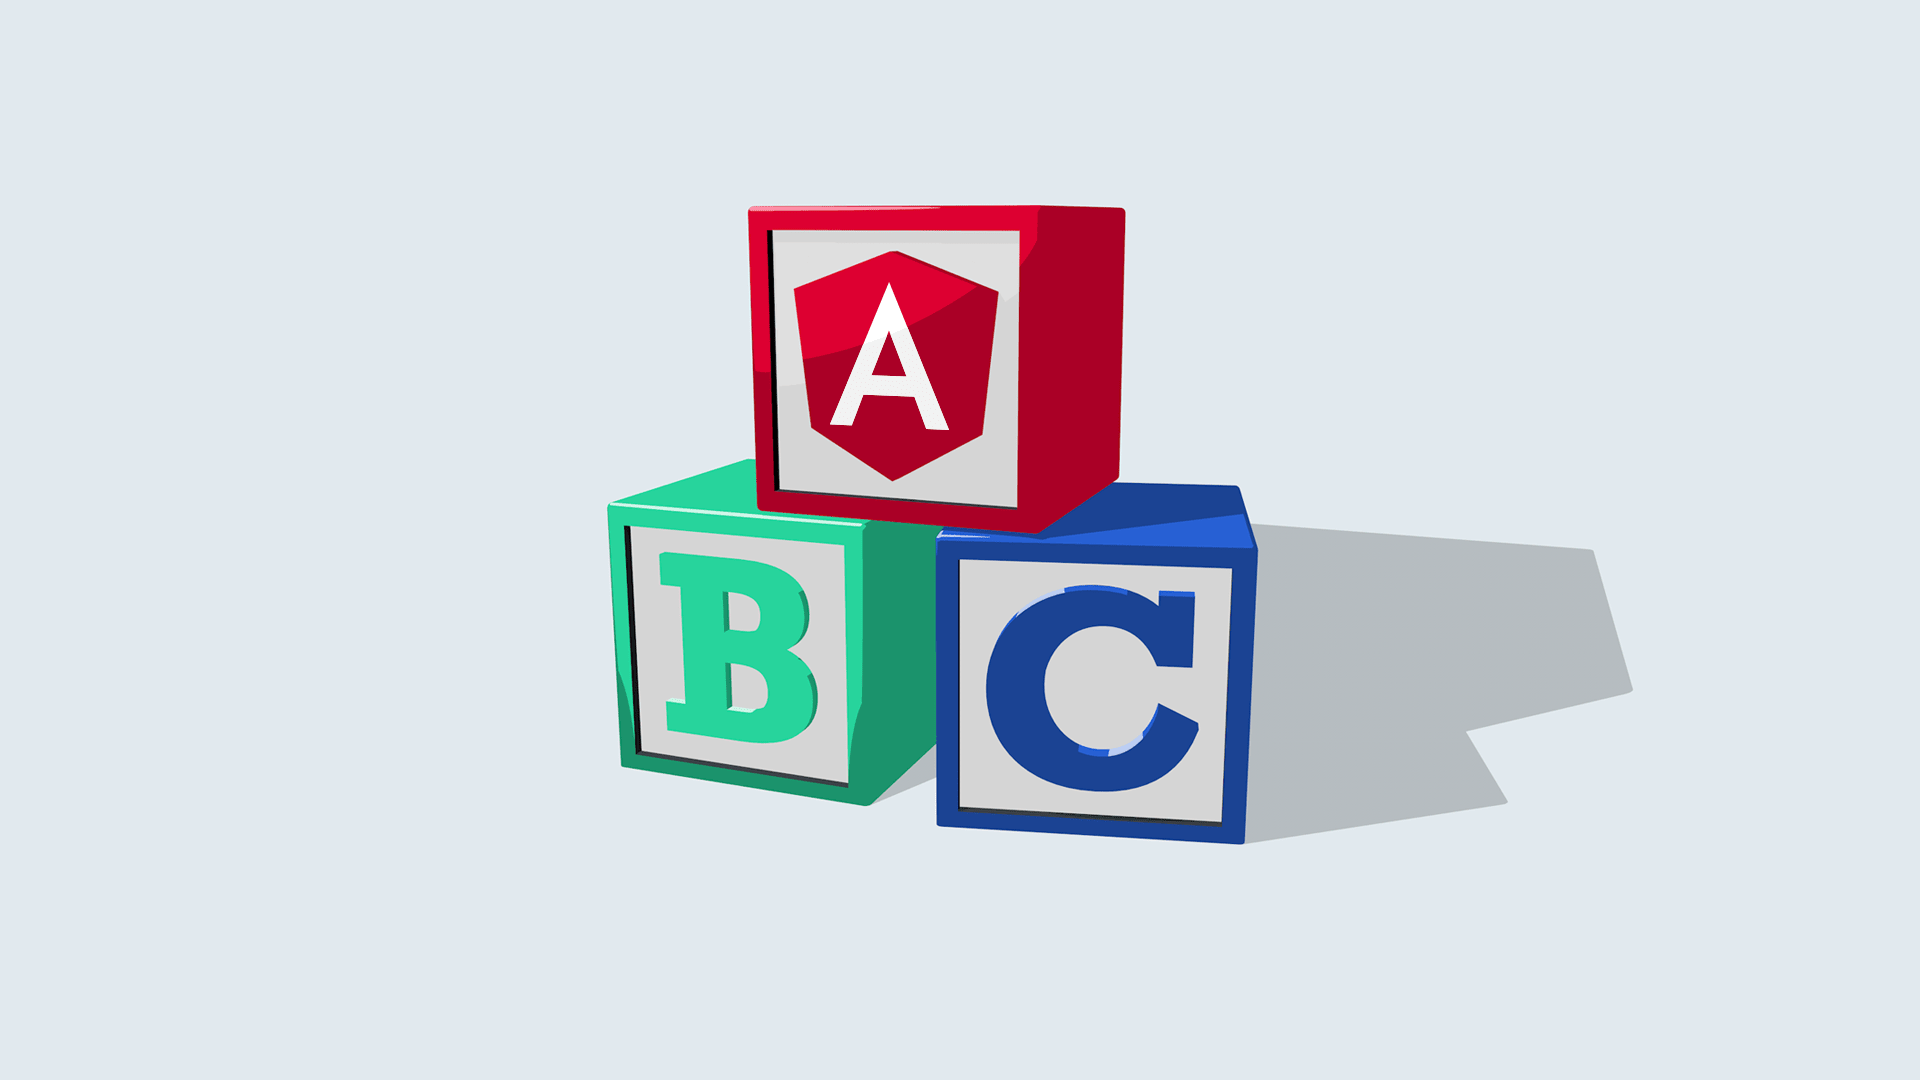 abc letter blocks with the Angular logo replacing the A